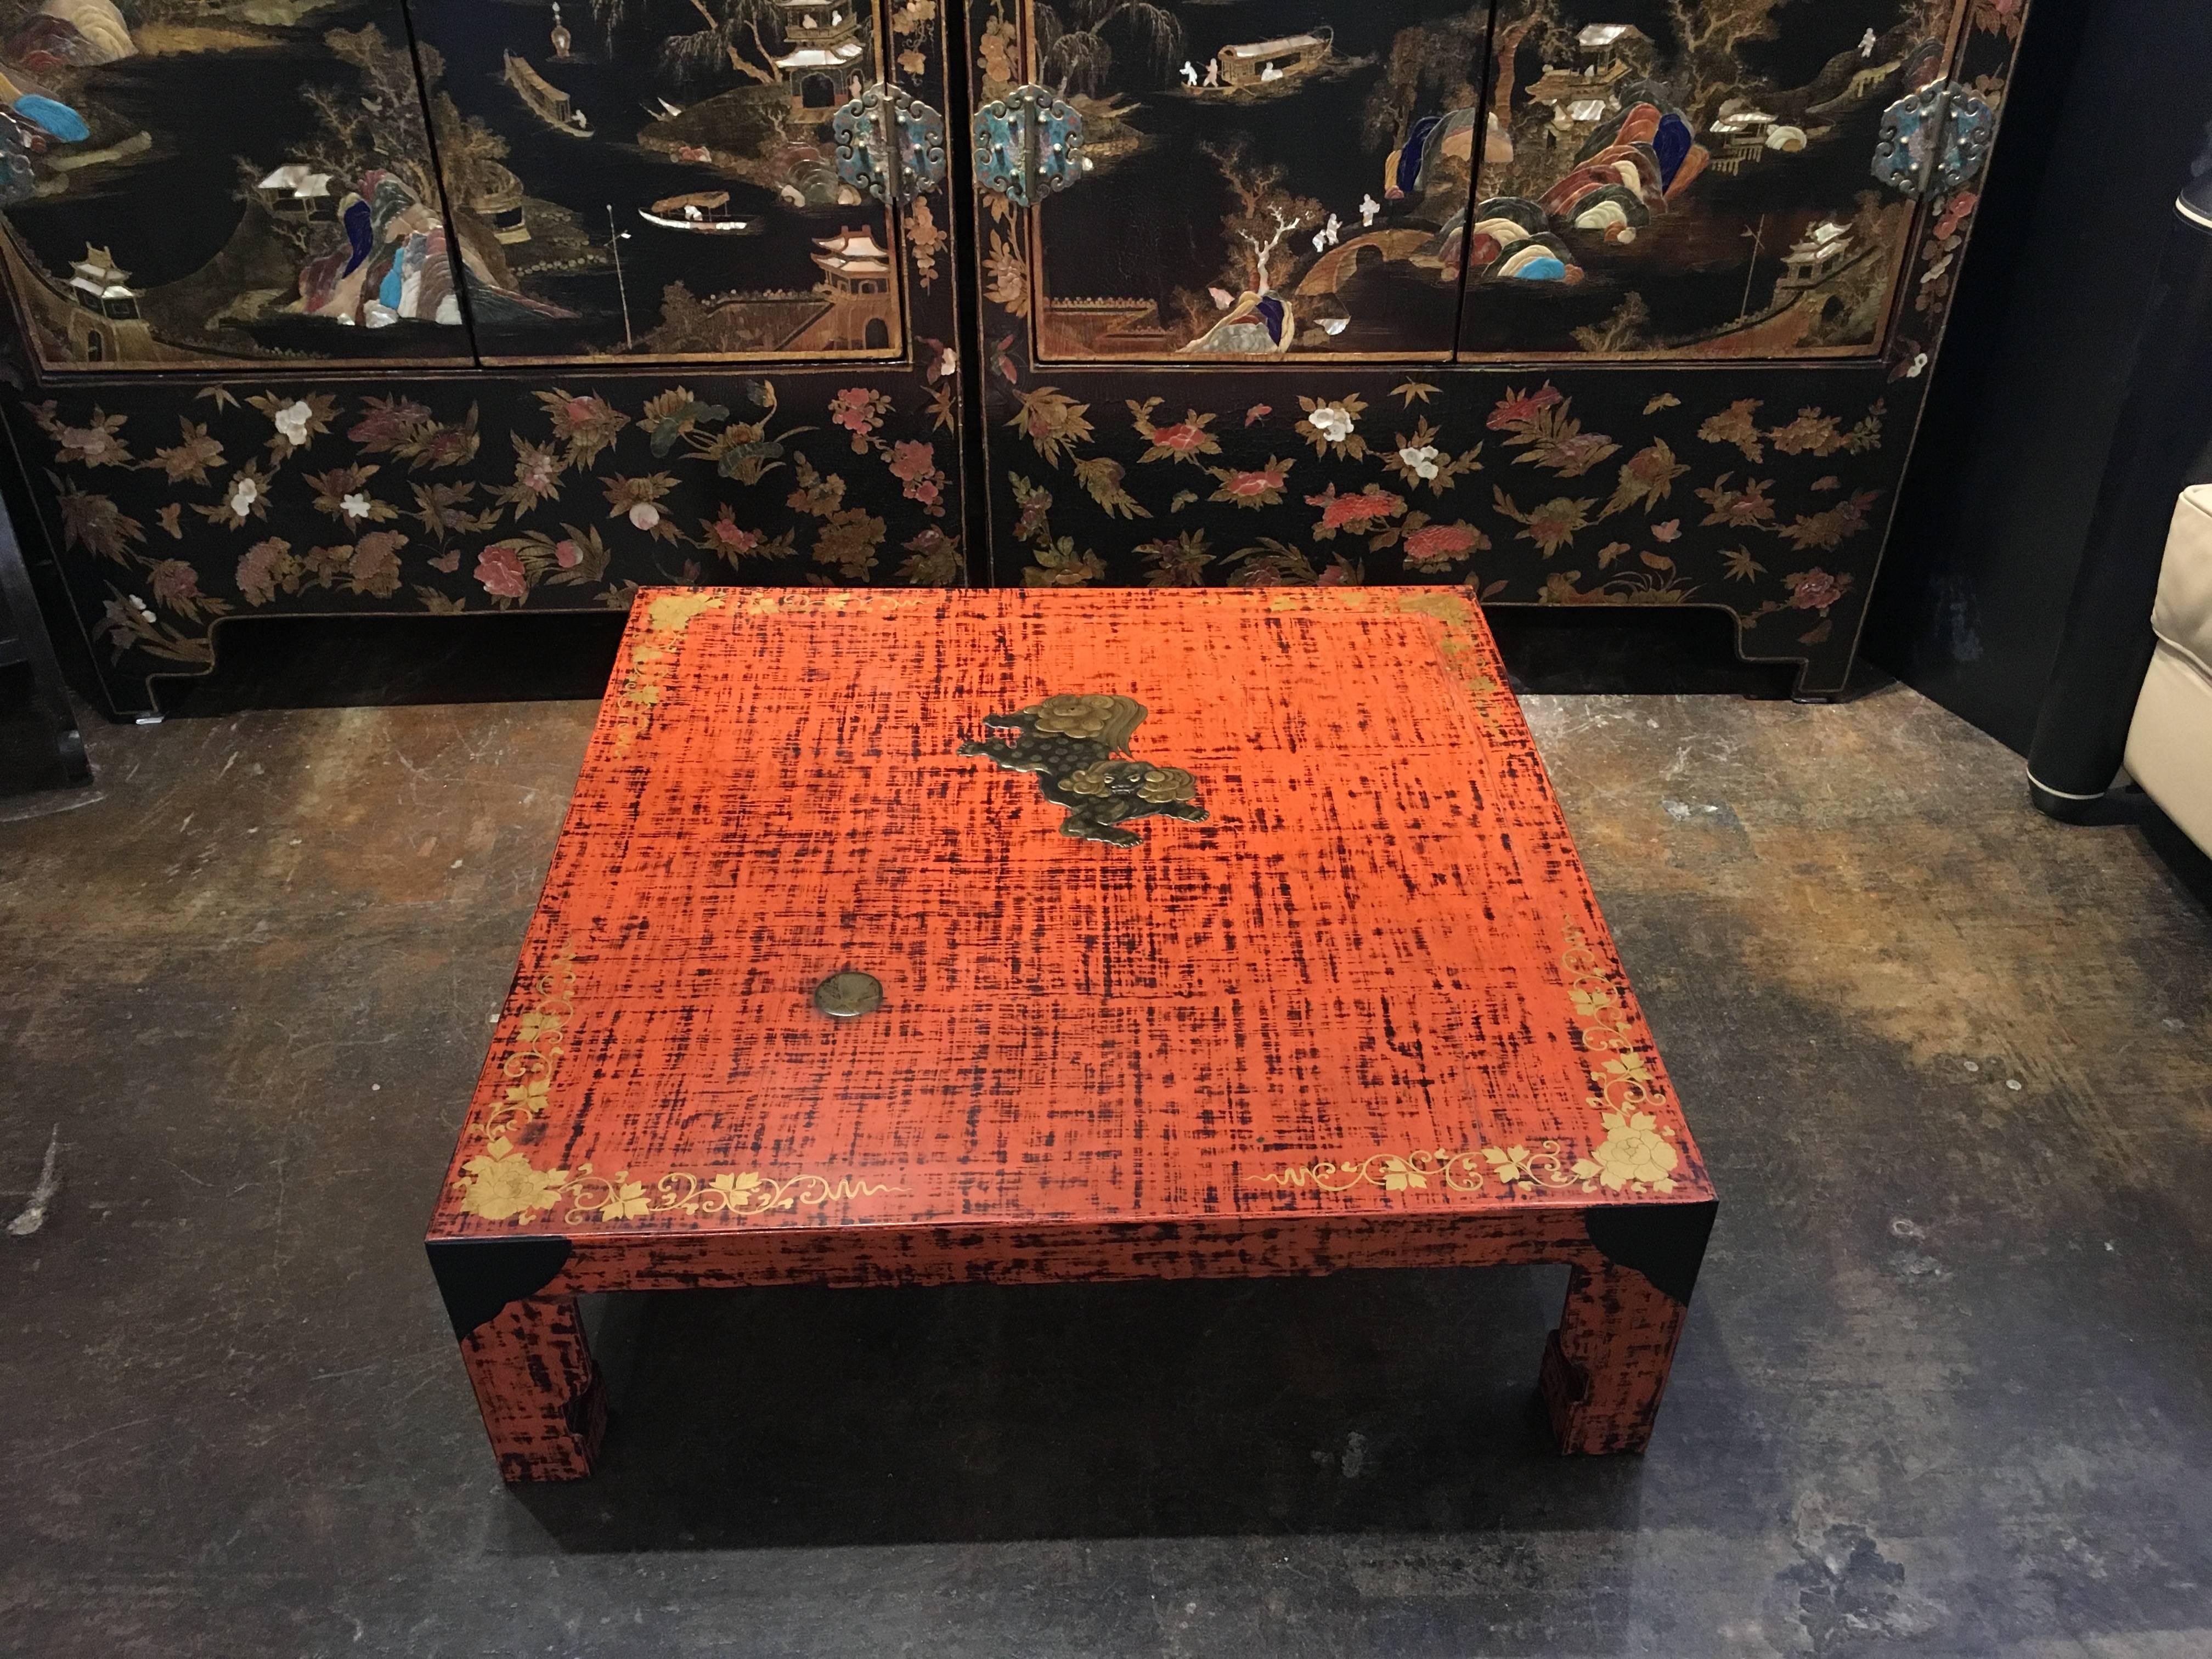 A stunning Japanese red and black negoro lacquer low, square table with a takamakie lacquer design of a shishi and ball, dated 3rd year of Showa, corresponding to 1928, and signed Katsunari. 
The table covered in a beautiful negoro lacquer of